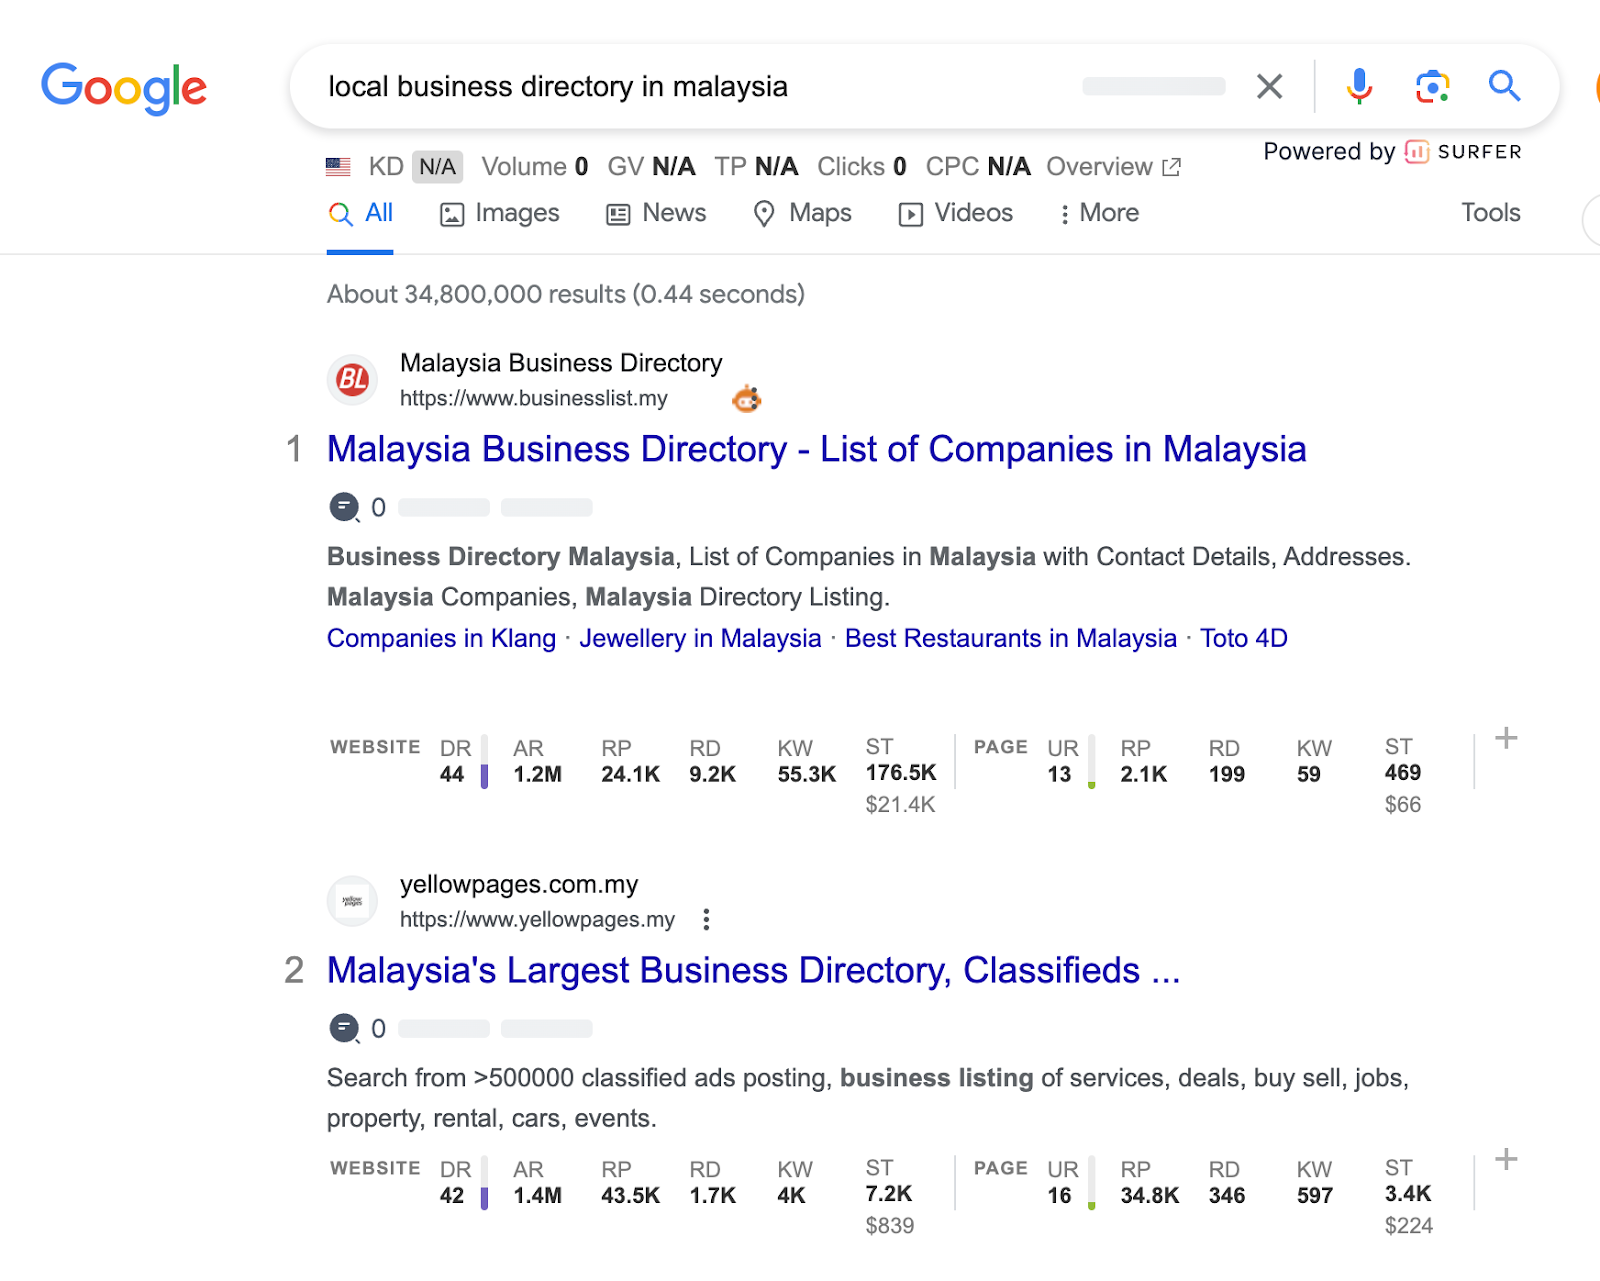 Examples of local business directory websites in Malaysia